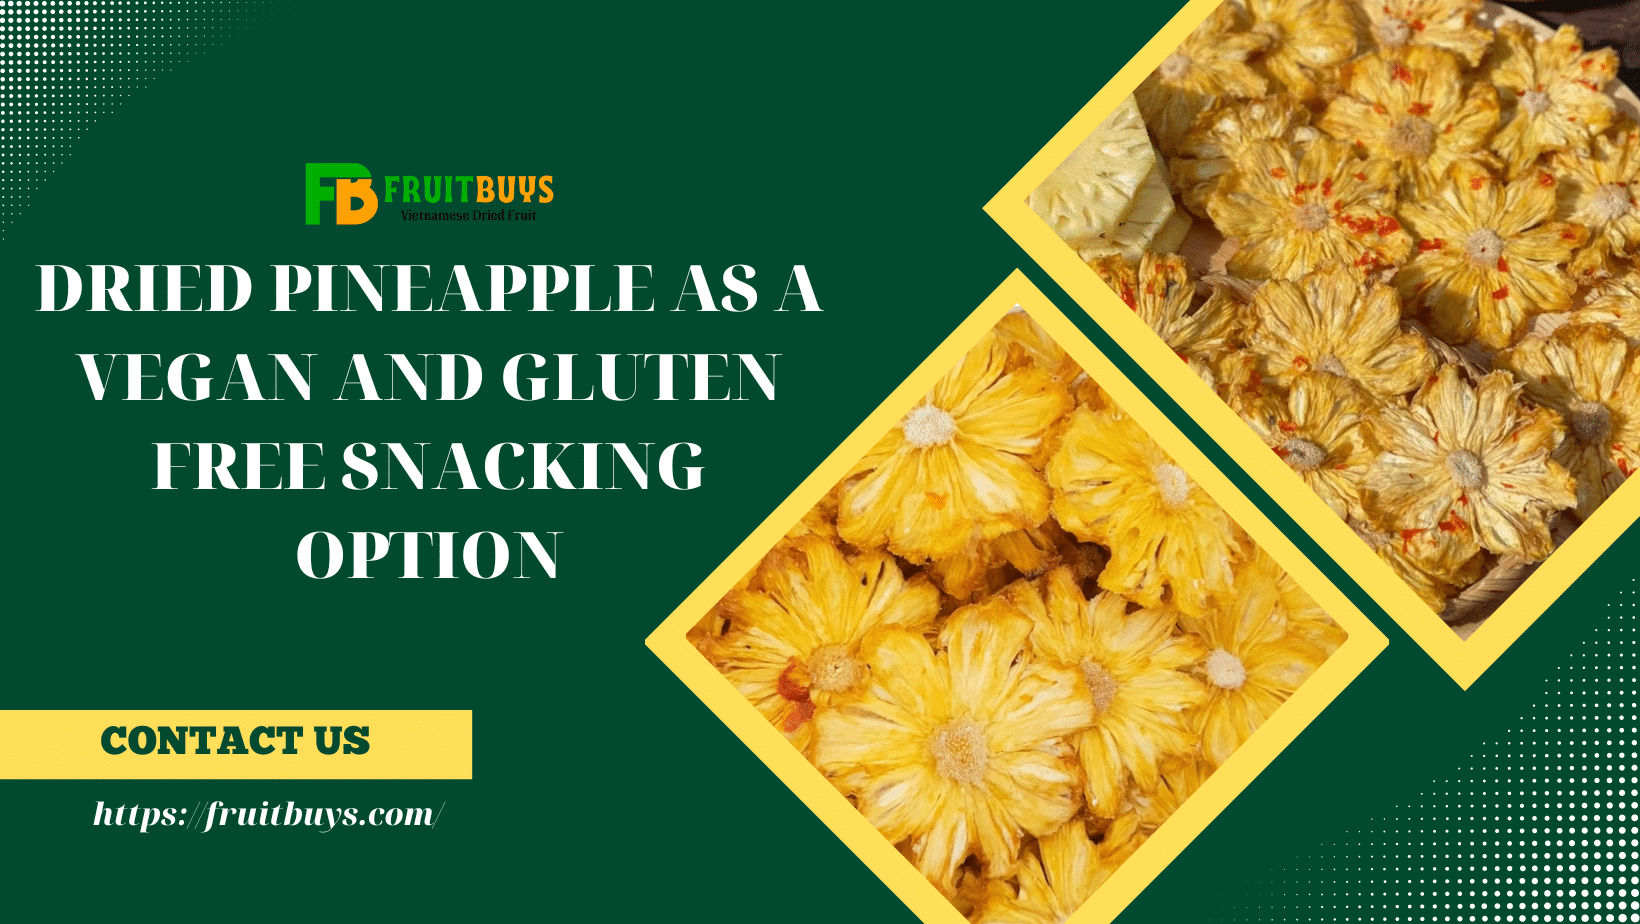 FruitBuys Vietnam Dried Pineapple As A Vegan And Gluten Free Snacking Option